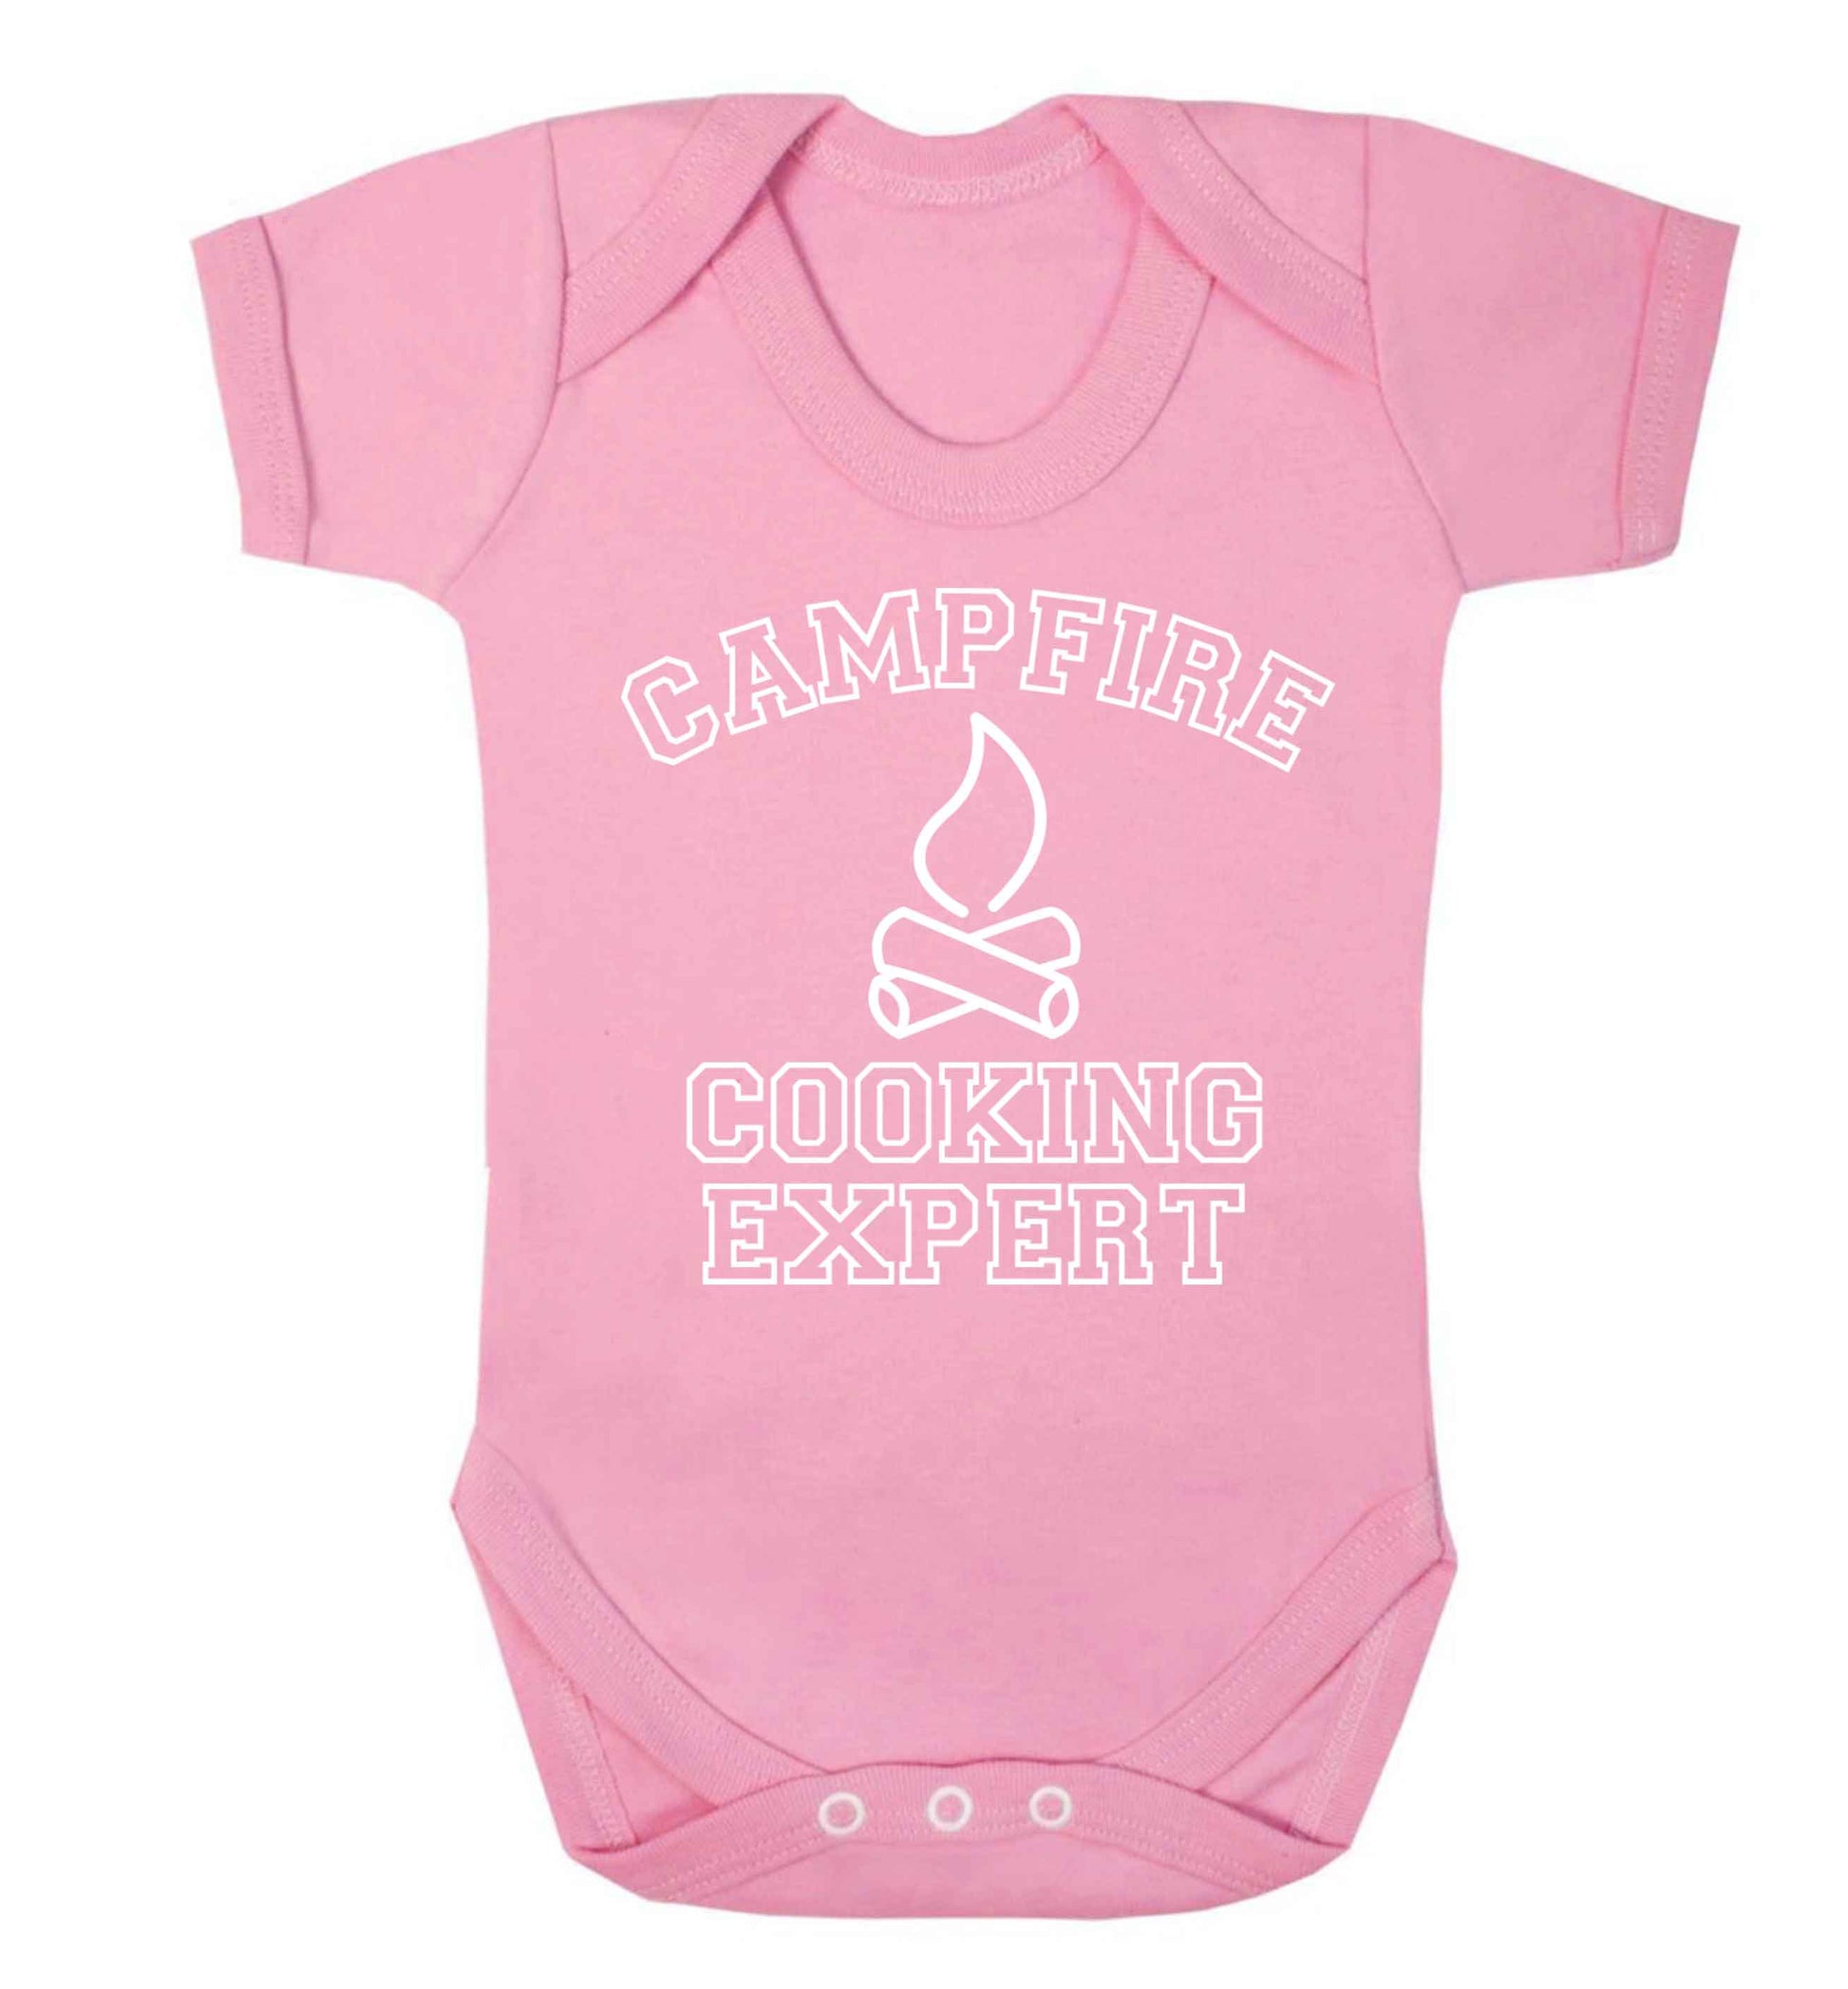 Campfire cooking expert Baby Vest pale pink 18-24 months